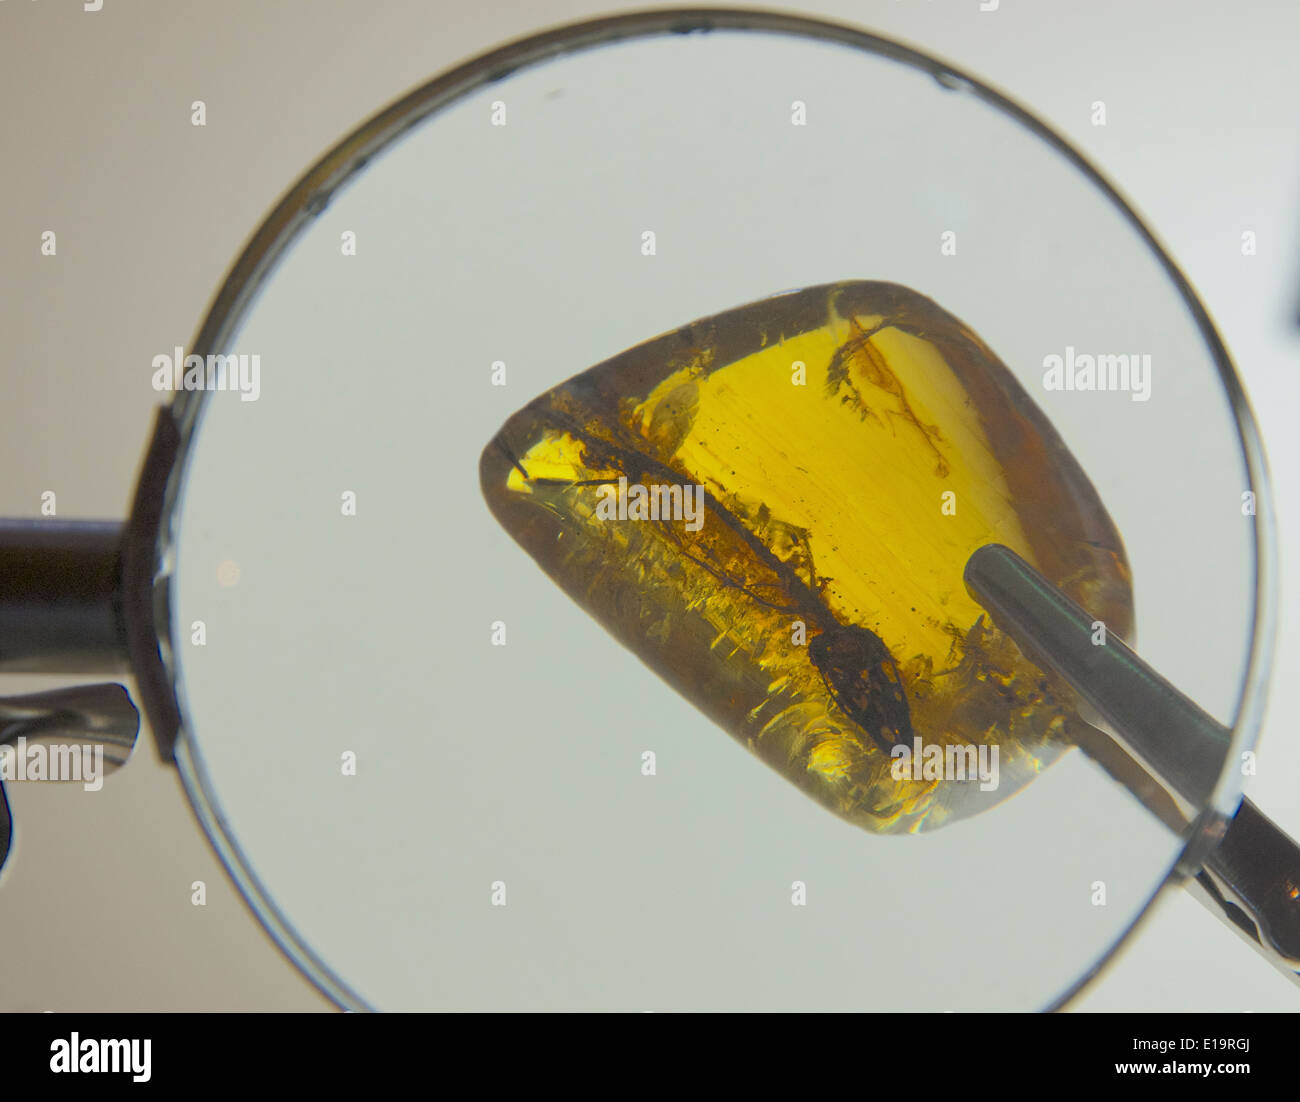 Fossilised insects in amber seen through magnifying glass San Cristobal de las Casas Chiapas Mexico Stock Photo